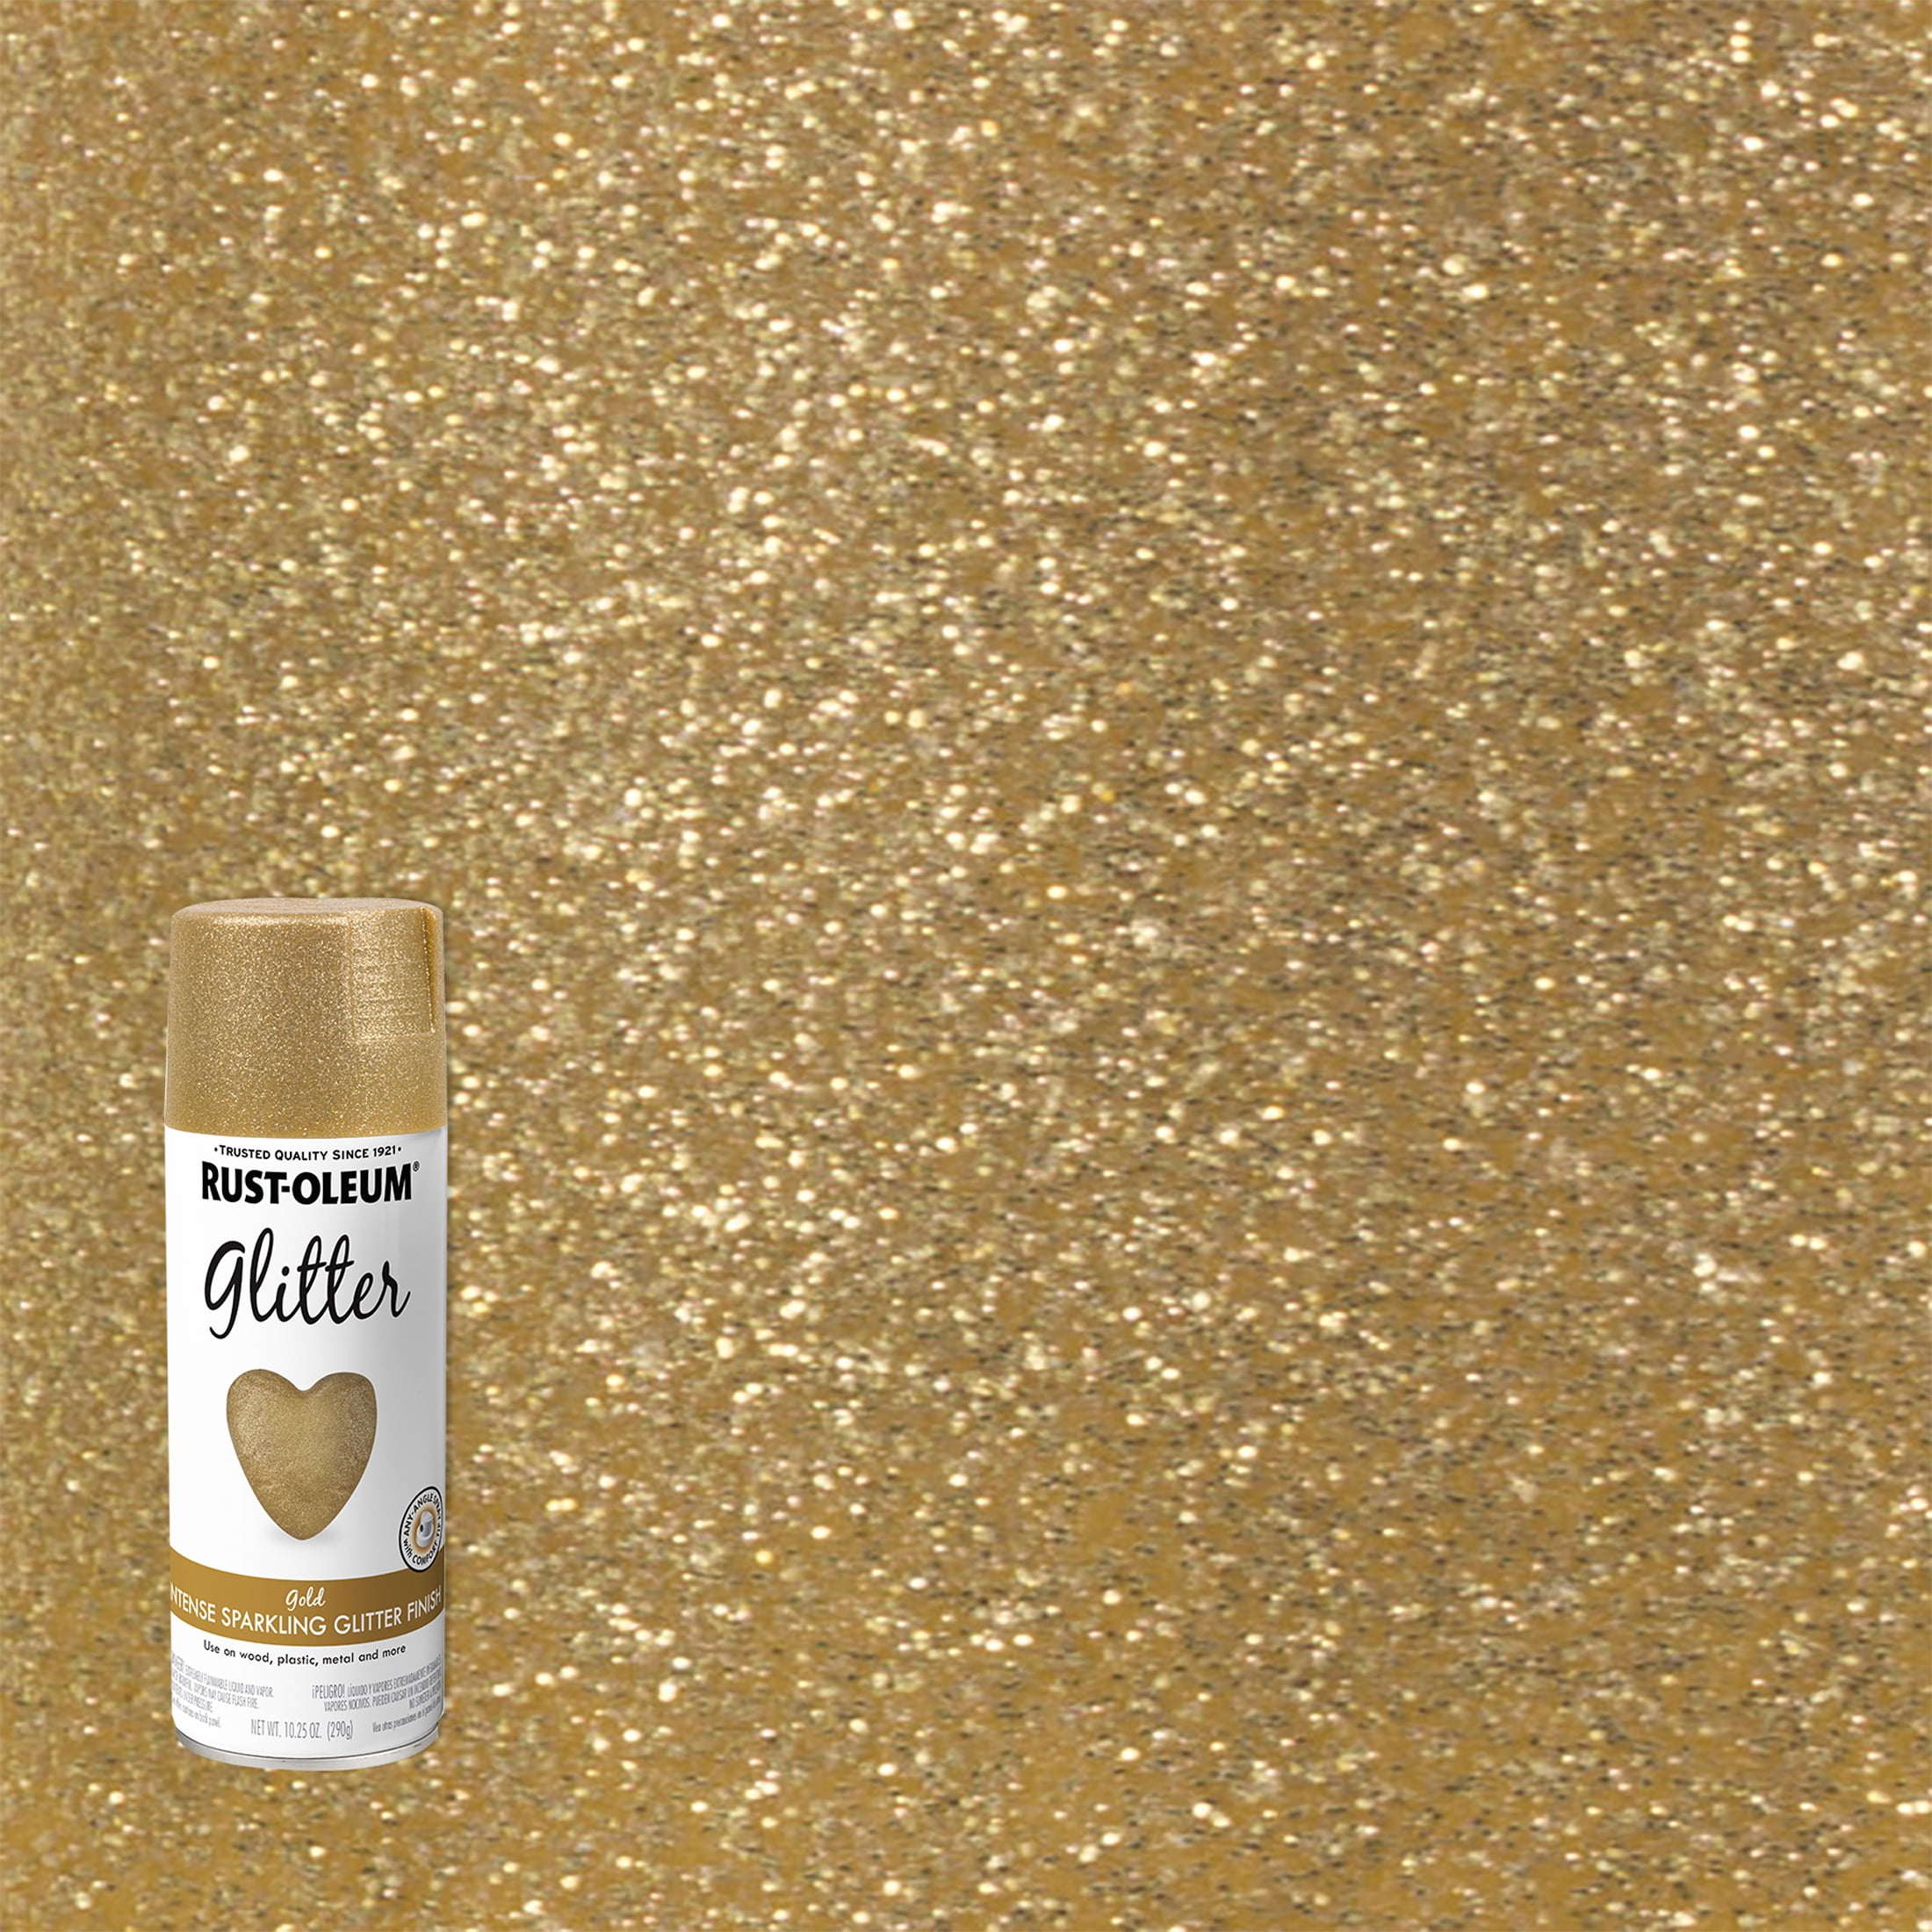 Specialty Glitter Spray Paint, Rose Gold, 10.25-oz.